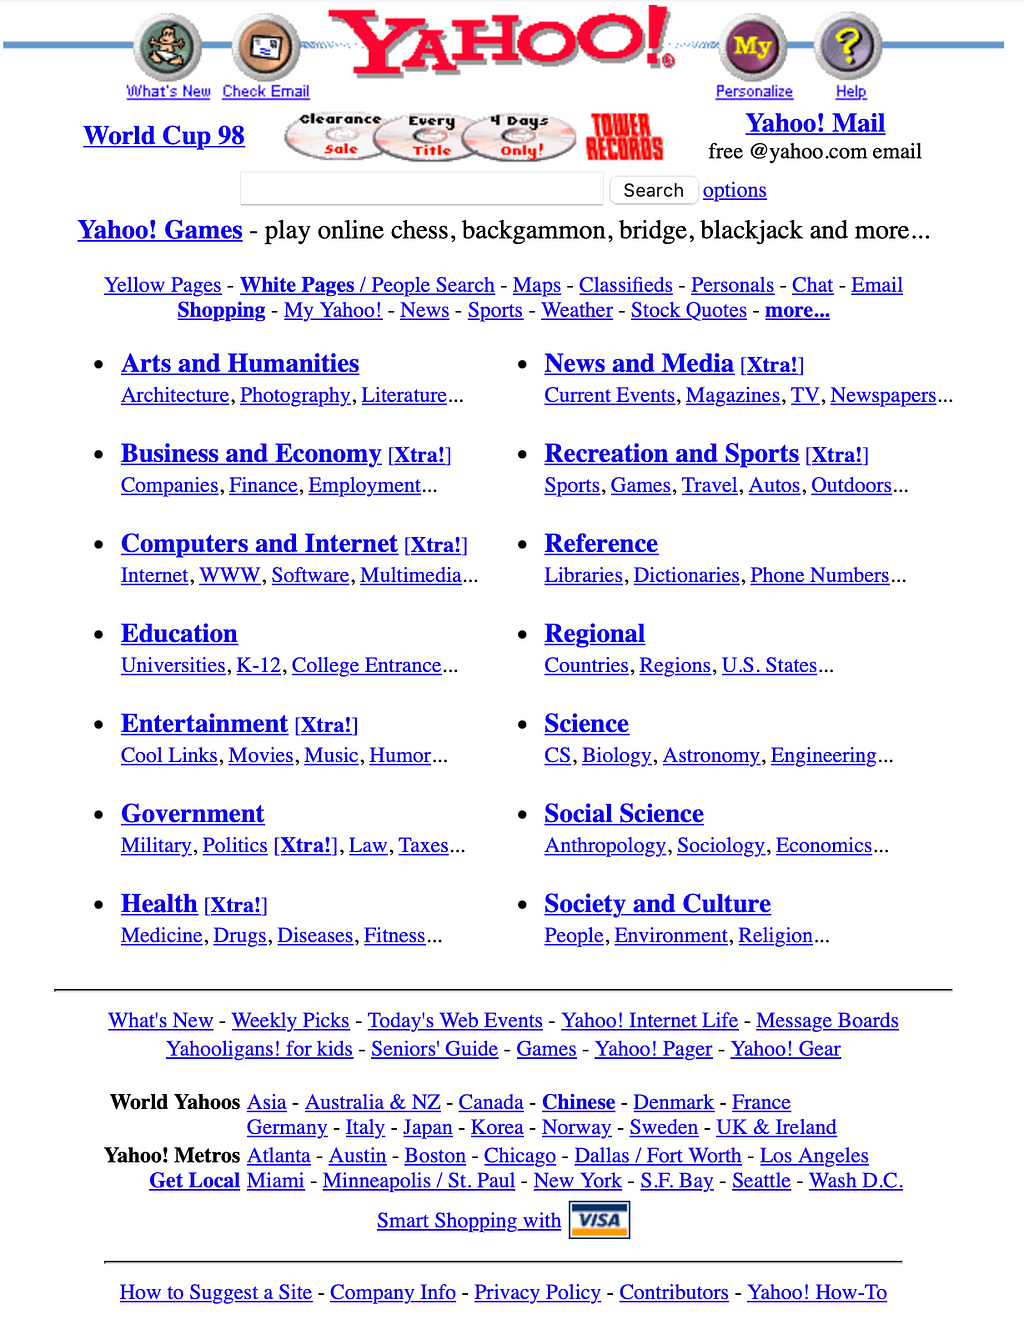 The Yahoo! homepage, circa 1998. The lion’s share of it is devoted to surfacing topics that allow visitors to drill down into its directory structure and find websites about the subjects that they’re interested in.